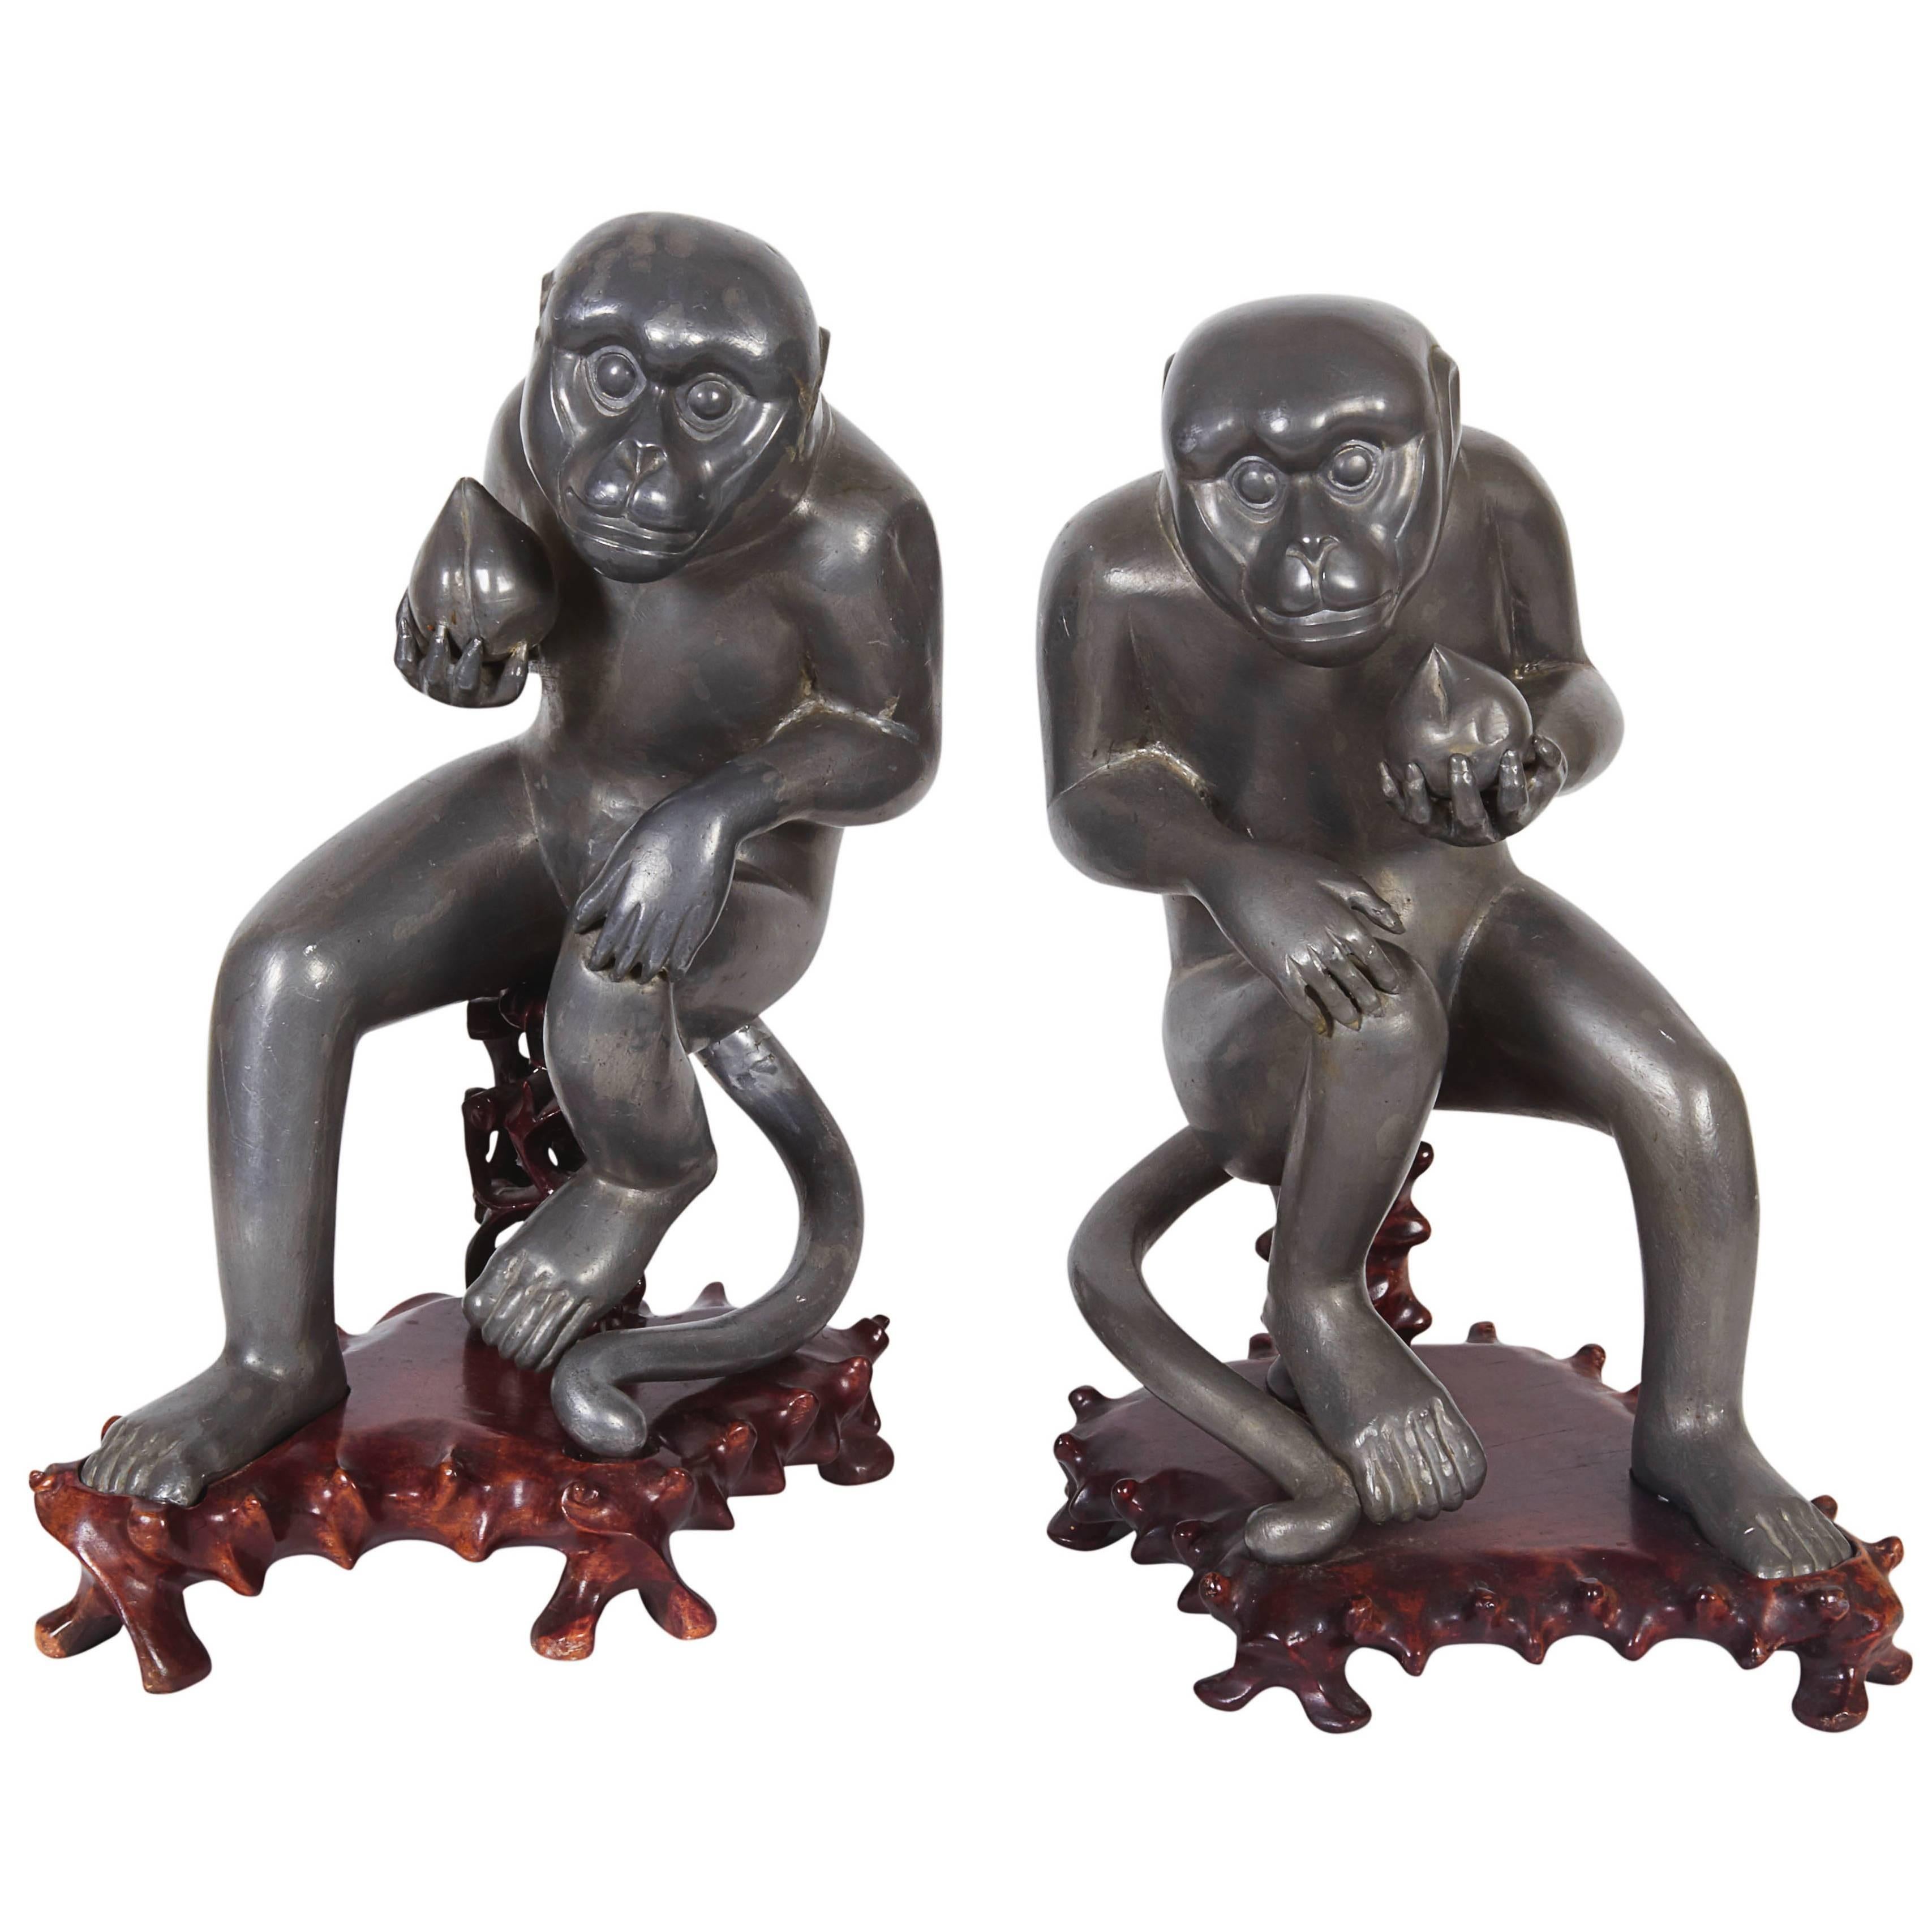 Pair of Chinese Export Pewter Monkey Sculptures on Bases